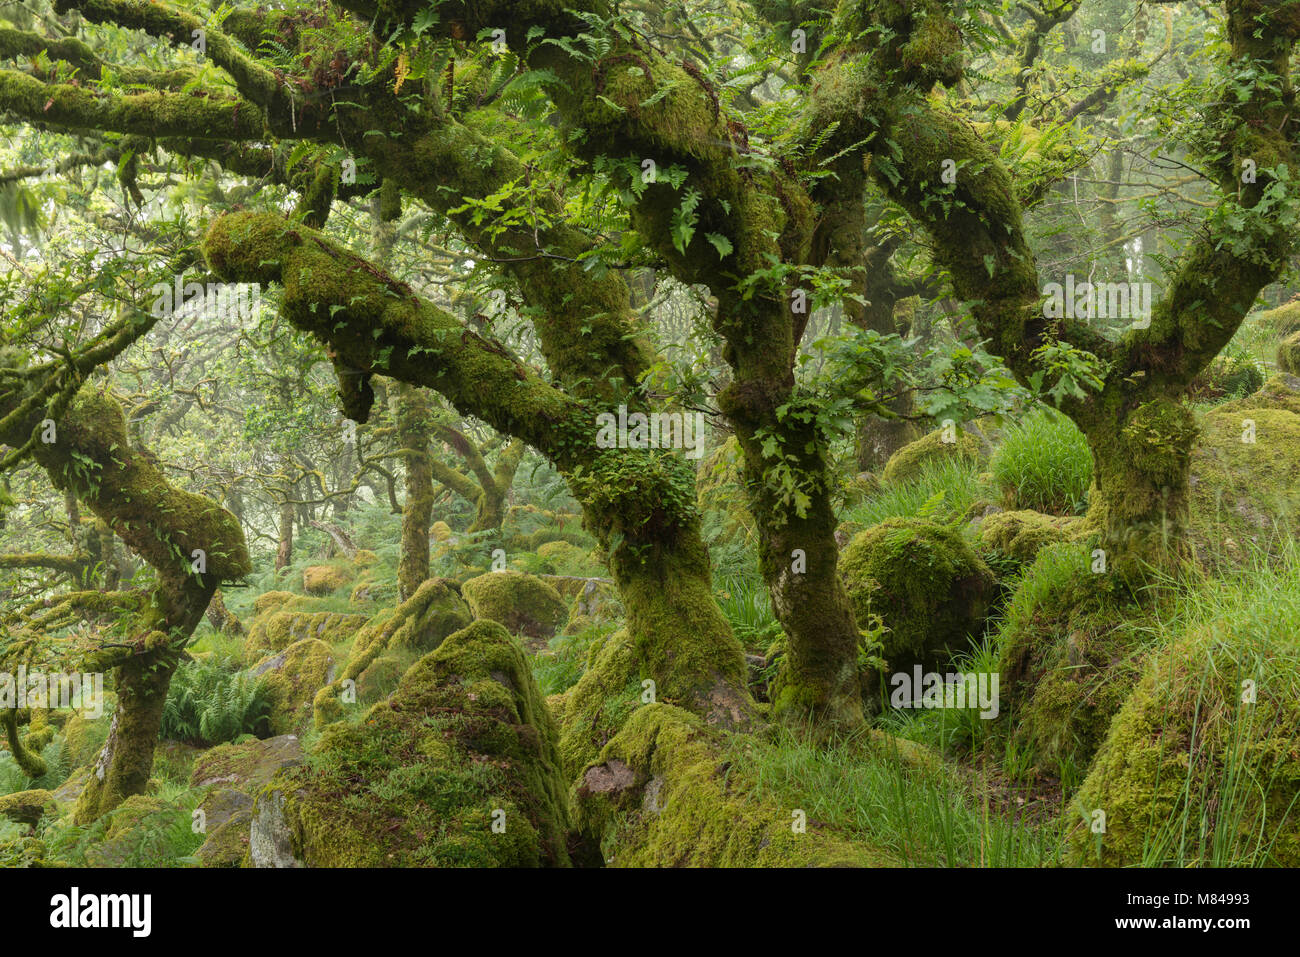 Gnarled and twisted oak trees in Wistman’s Wood, Dartmoor, Devon, England. Summer (July) 2017. Stock Photo